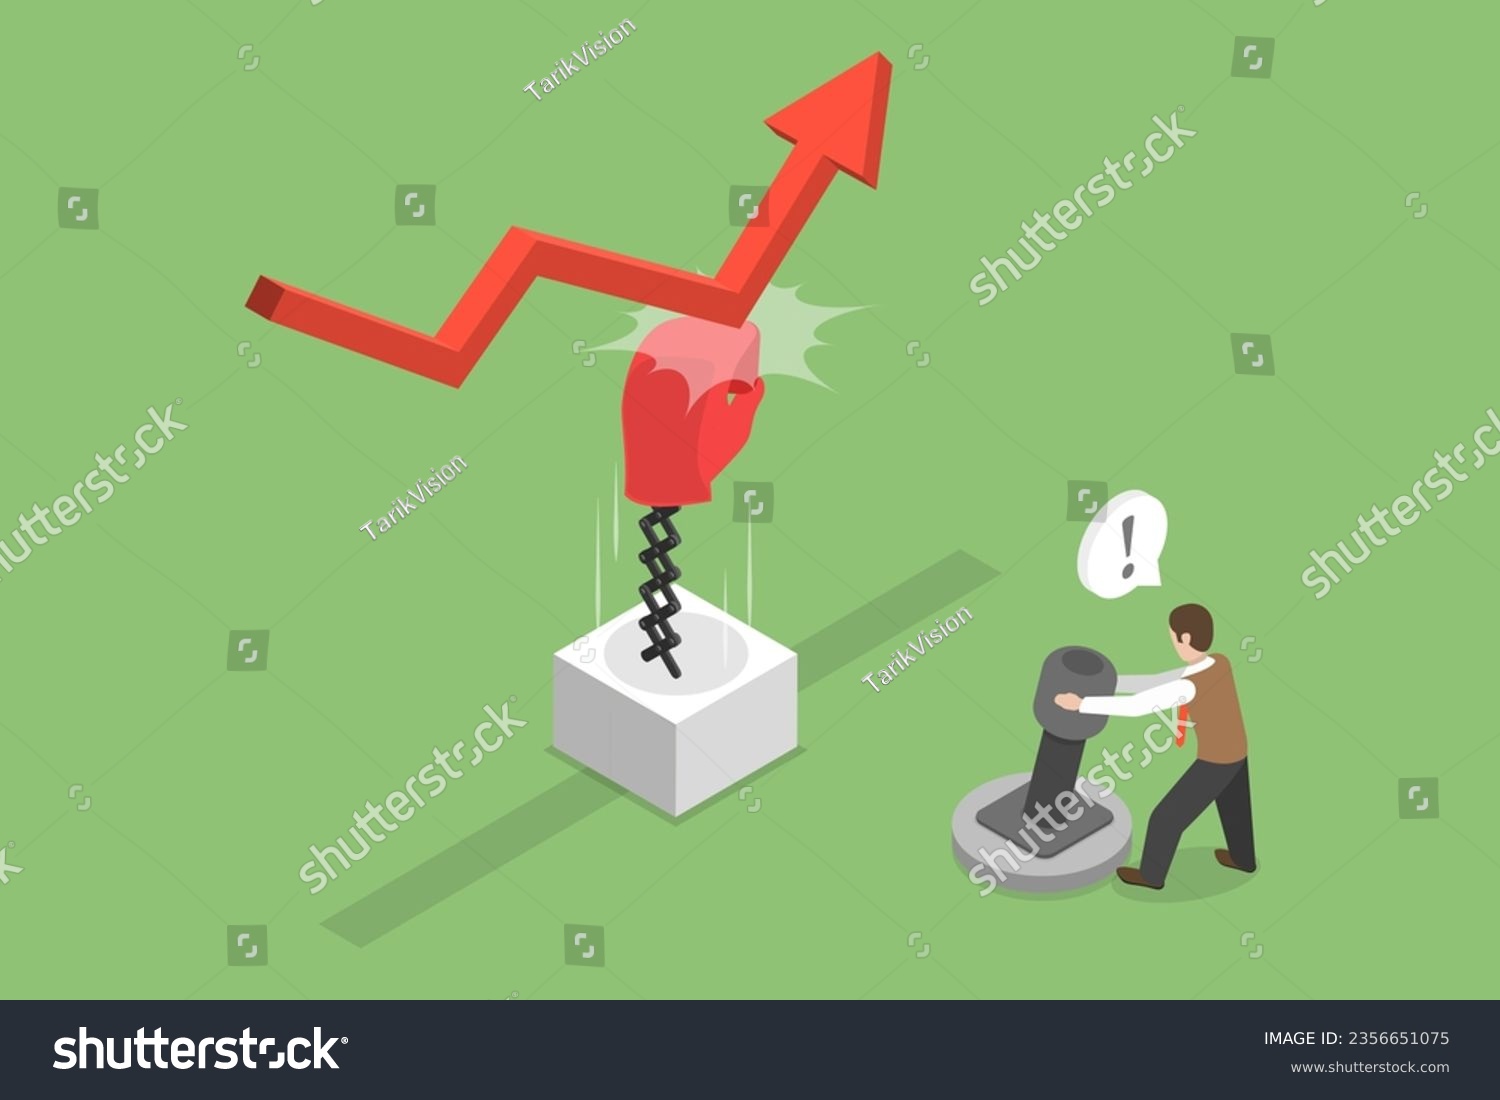 SVG of 3D Isometric Flat Vector Conceptual Illustration of Stock Market Rebound, Economical Rise After a Fall svg